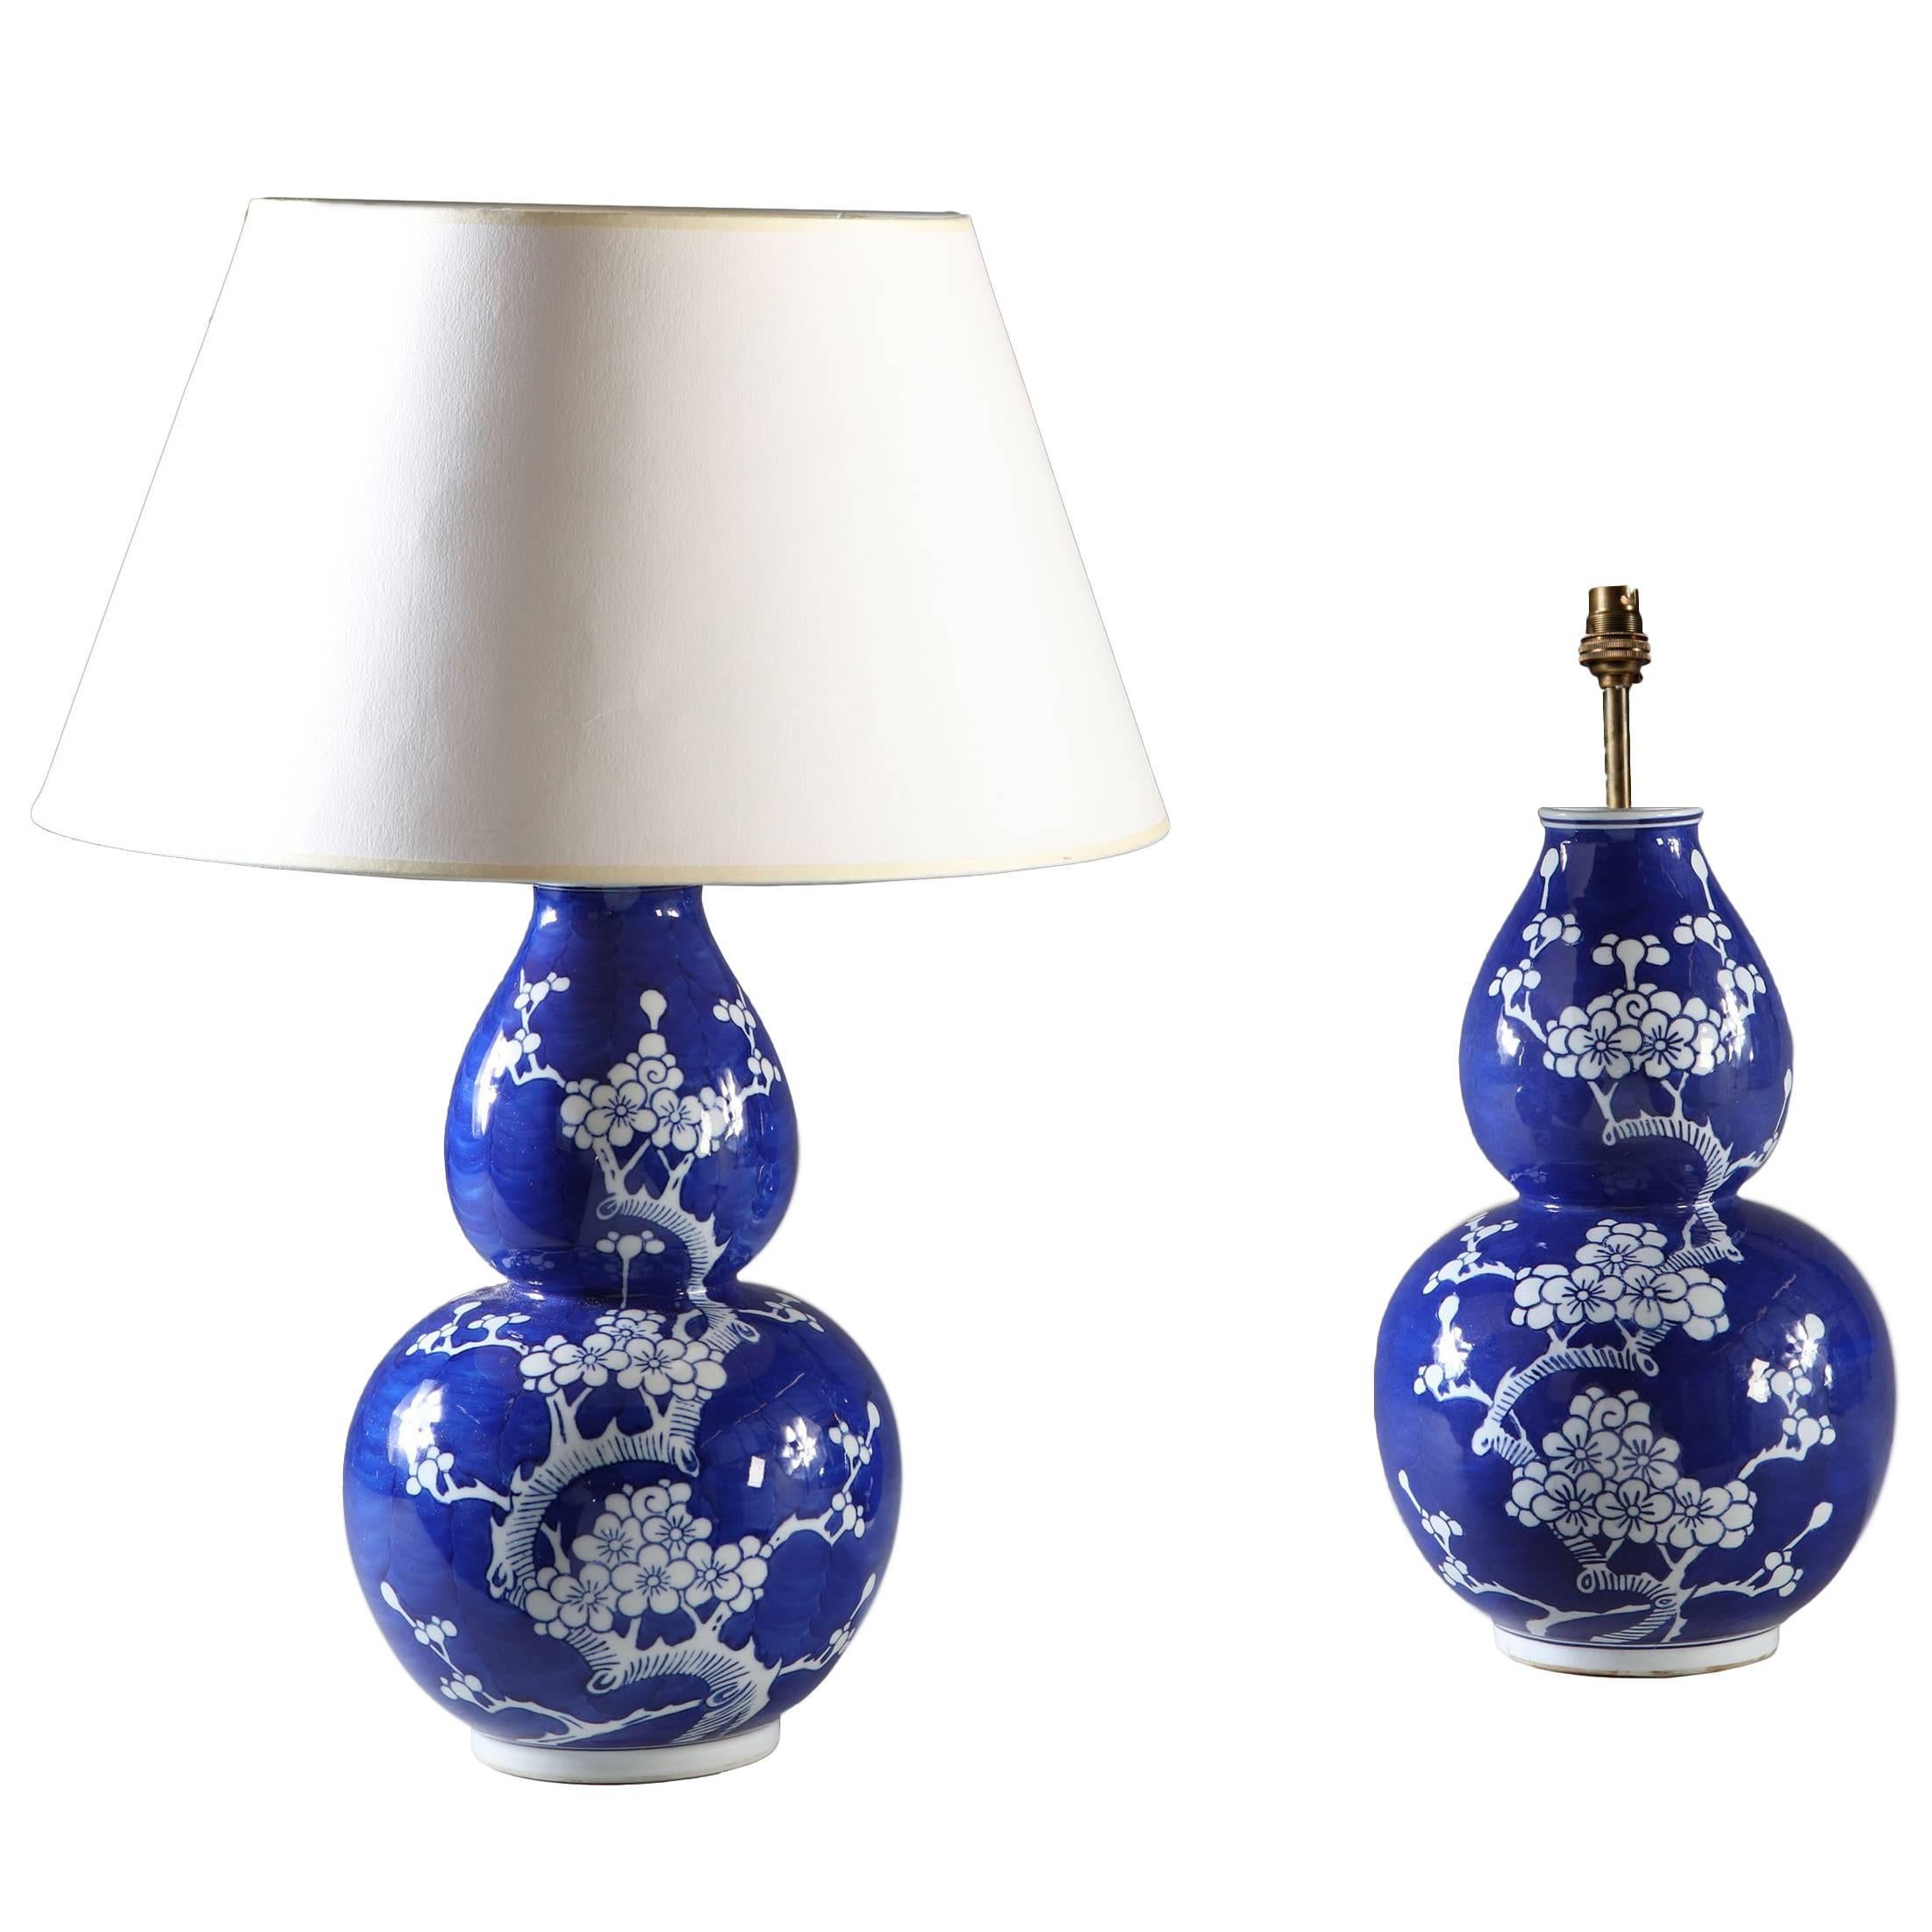 Pair of Double Gourd Chinese Lamps